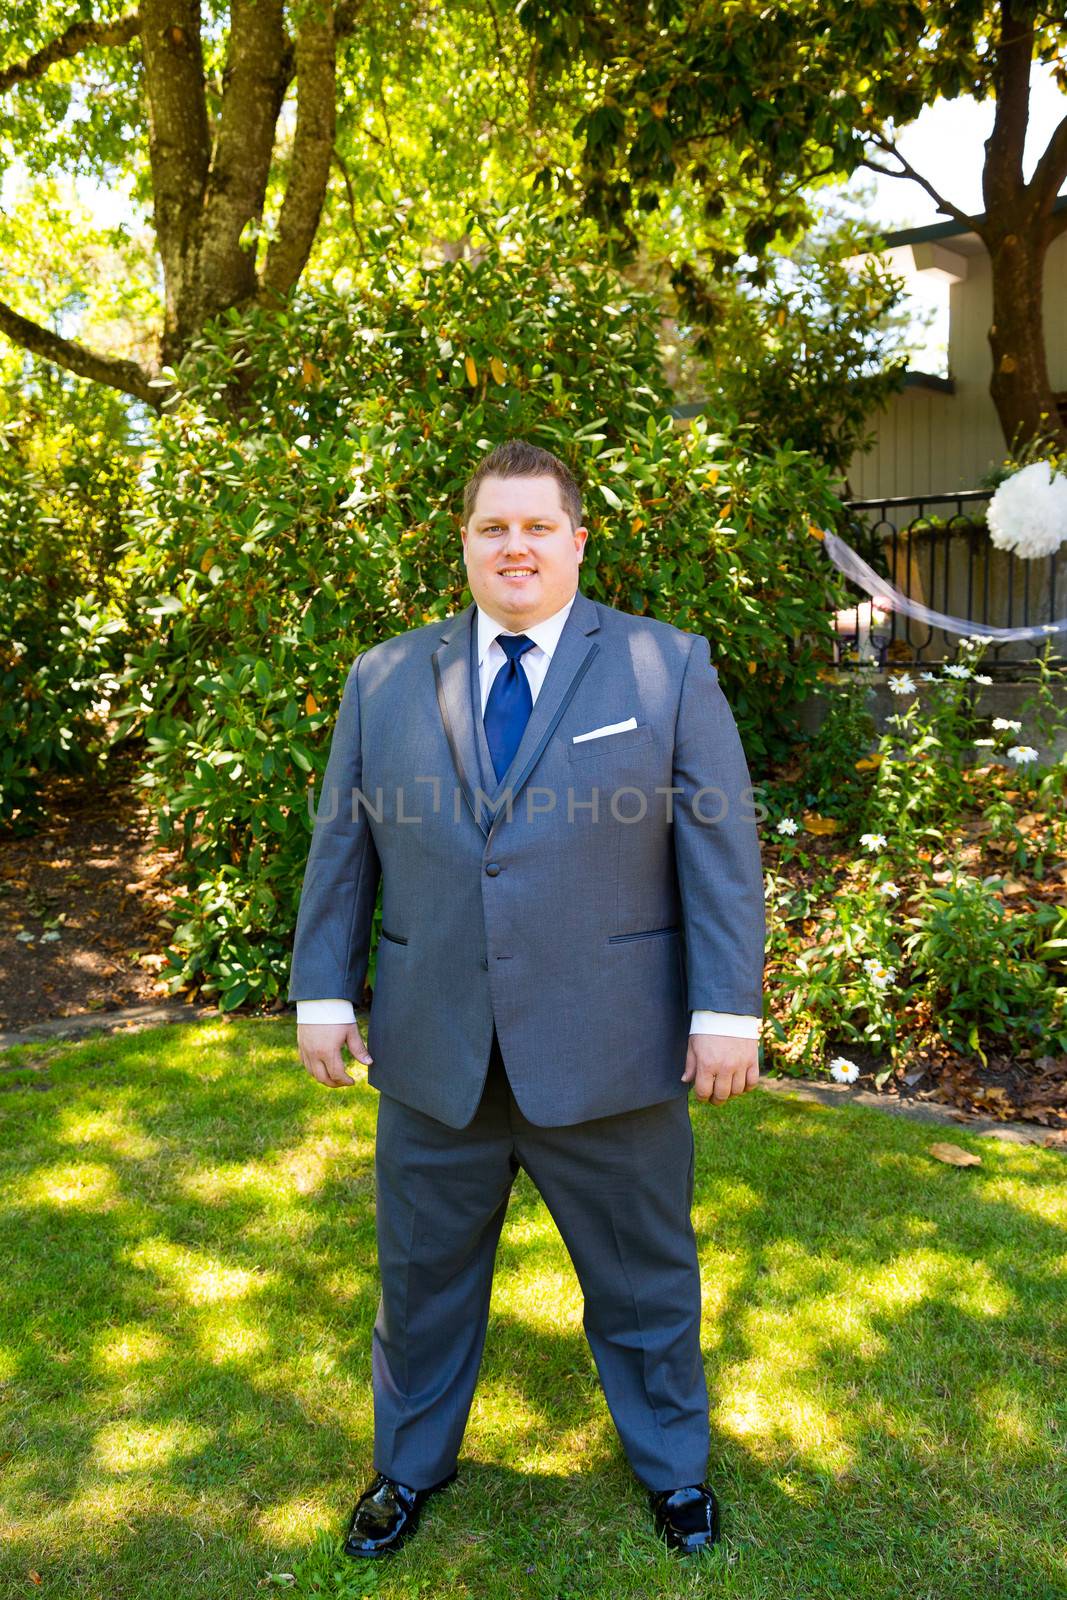 Portraits of a groom on his wedding day while waiting for his bride at a park outdoors in Oregon before the ceremony.